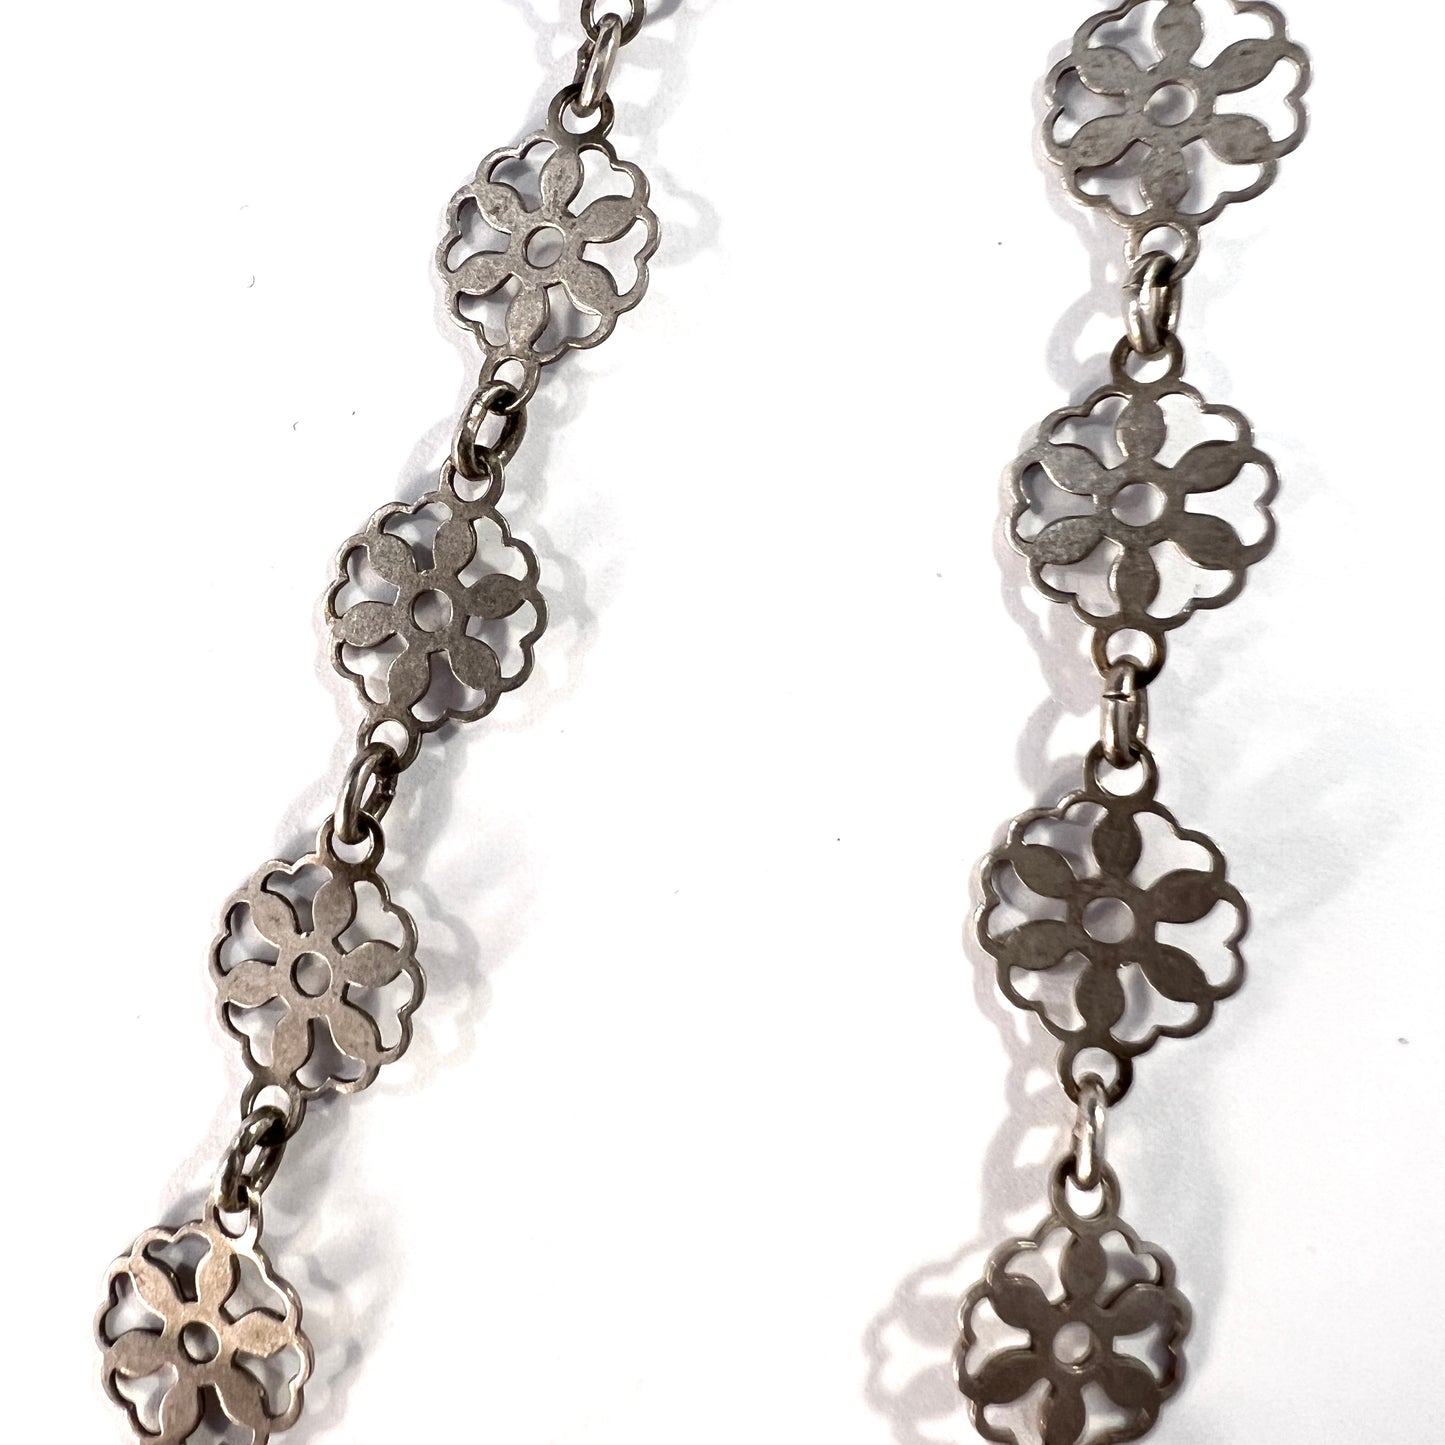 Sweden. Antique Solid Silver 60 inch Longuard Chain Necklace.